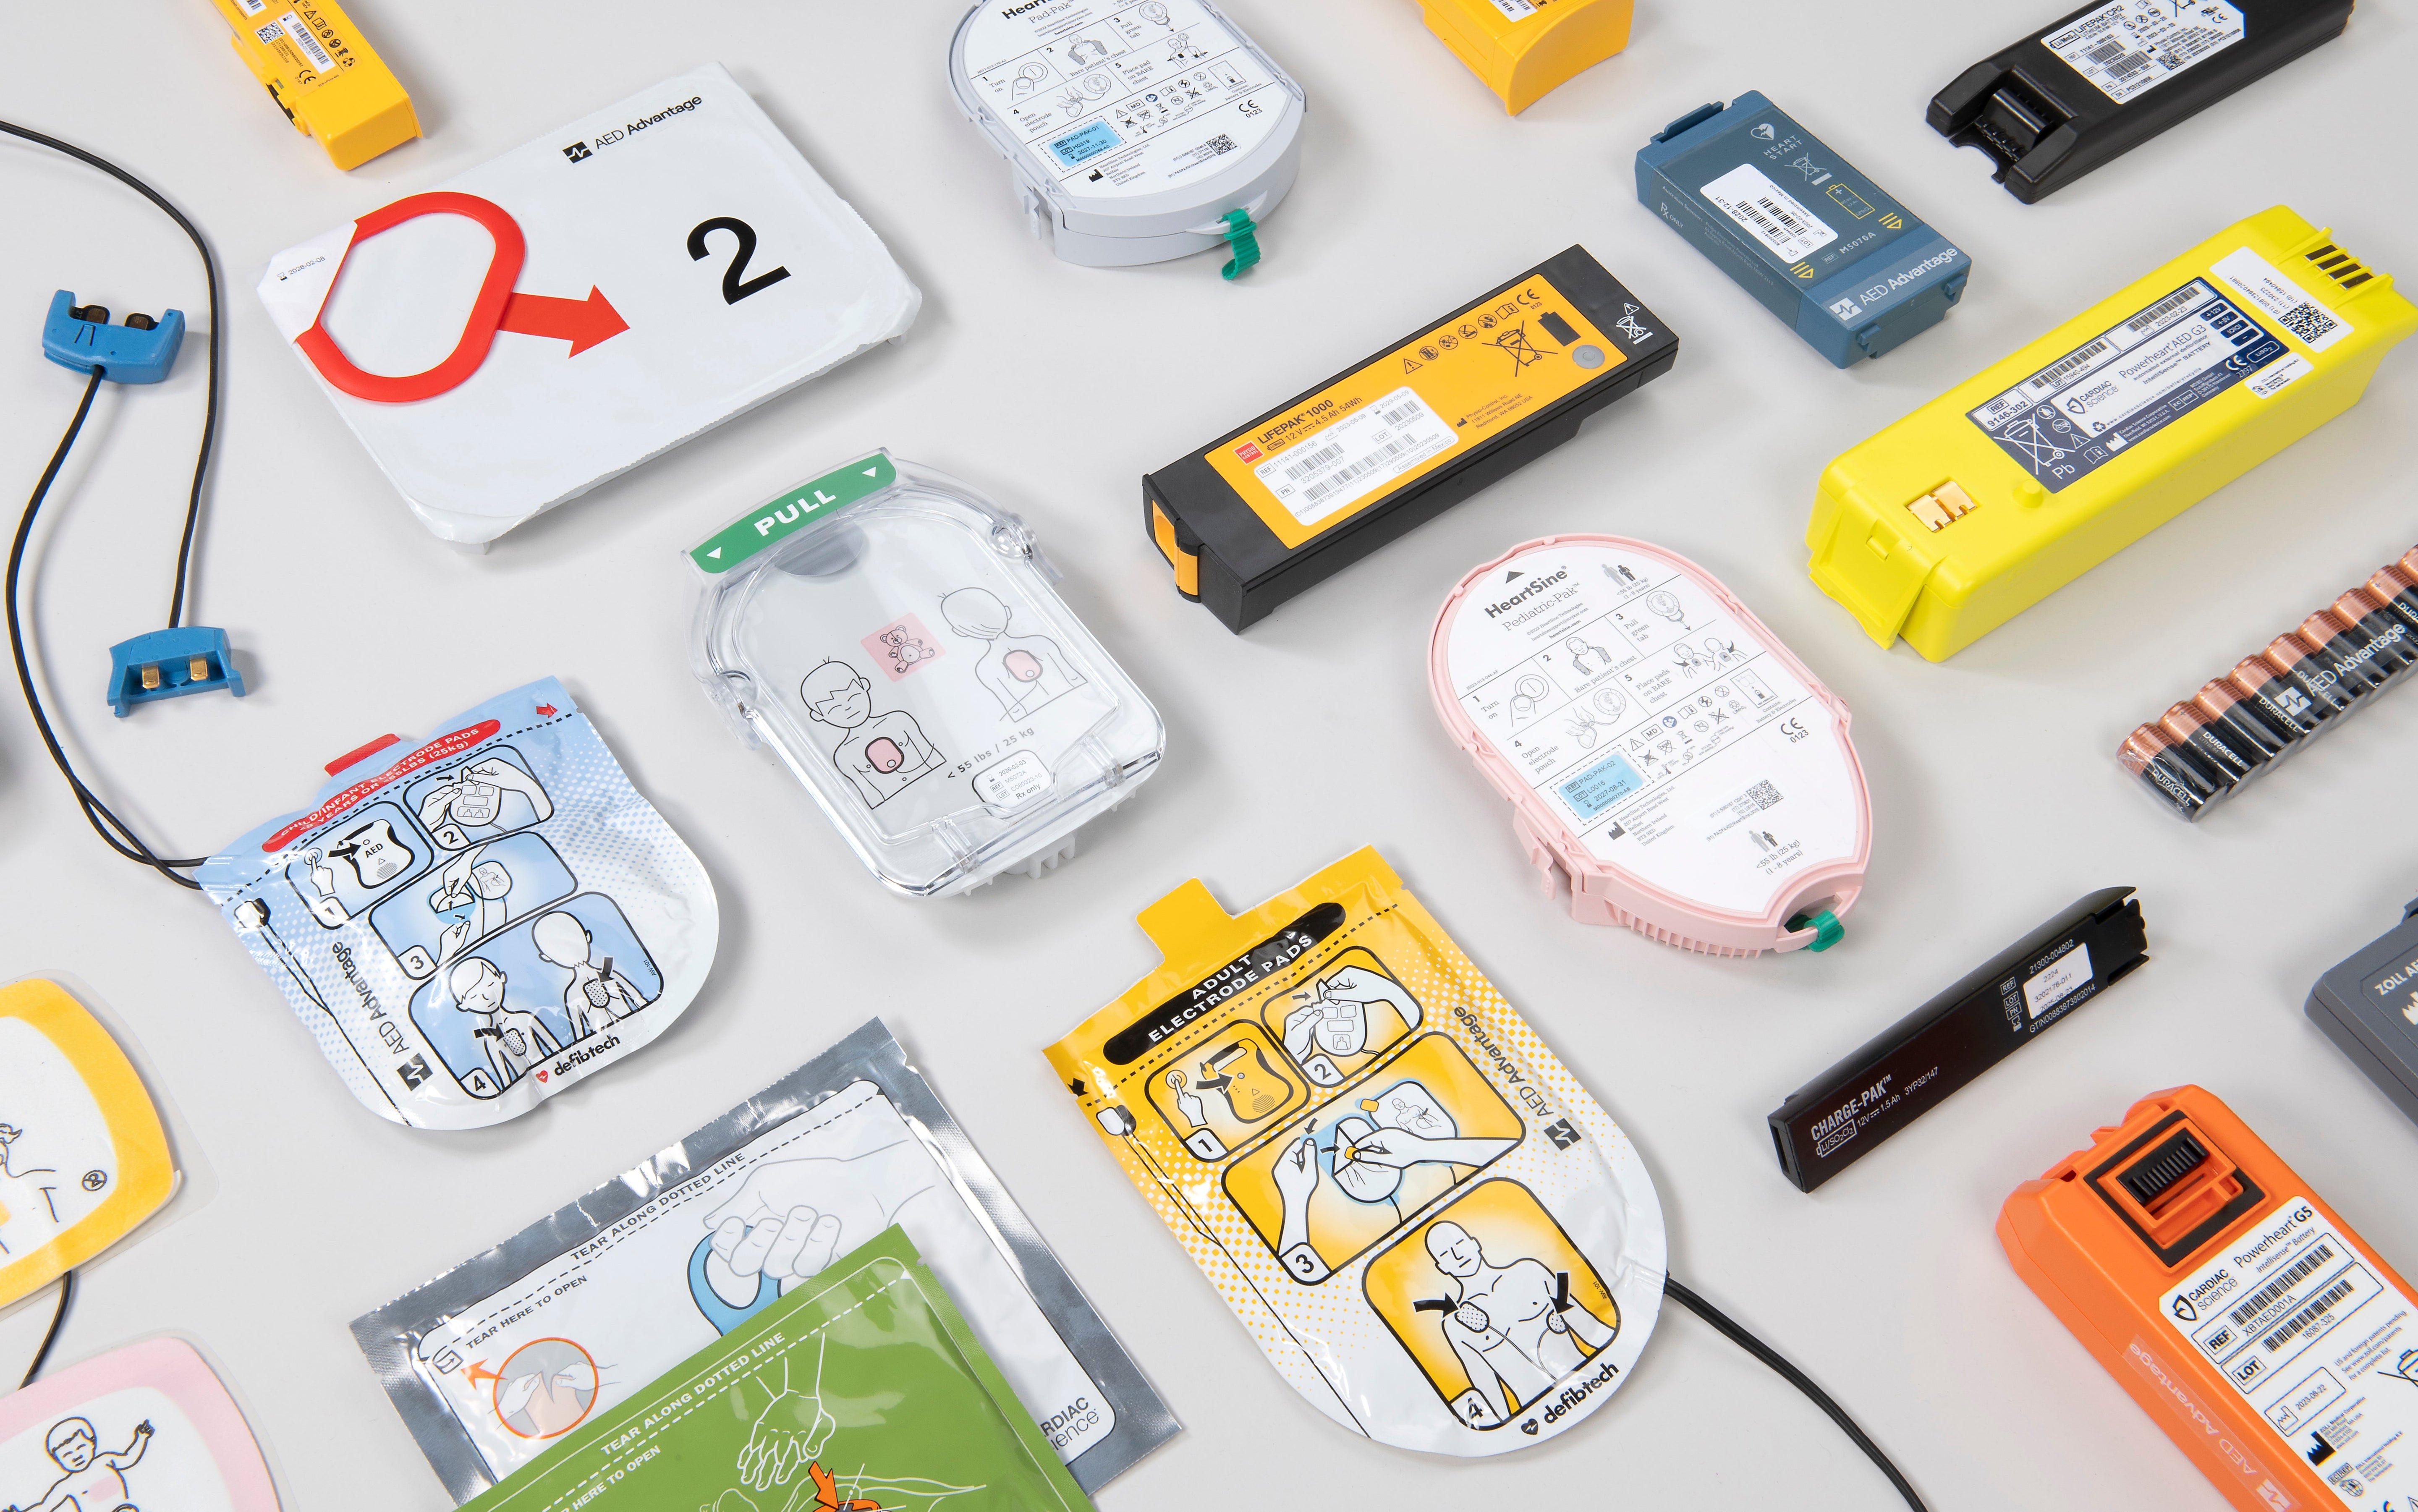 A collage of multi-colored pads and batteries for various defibrillators